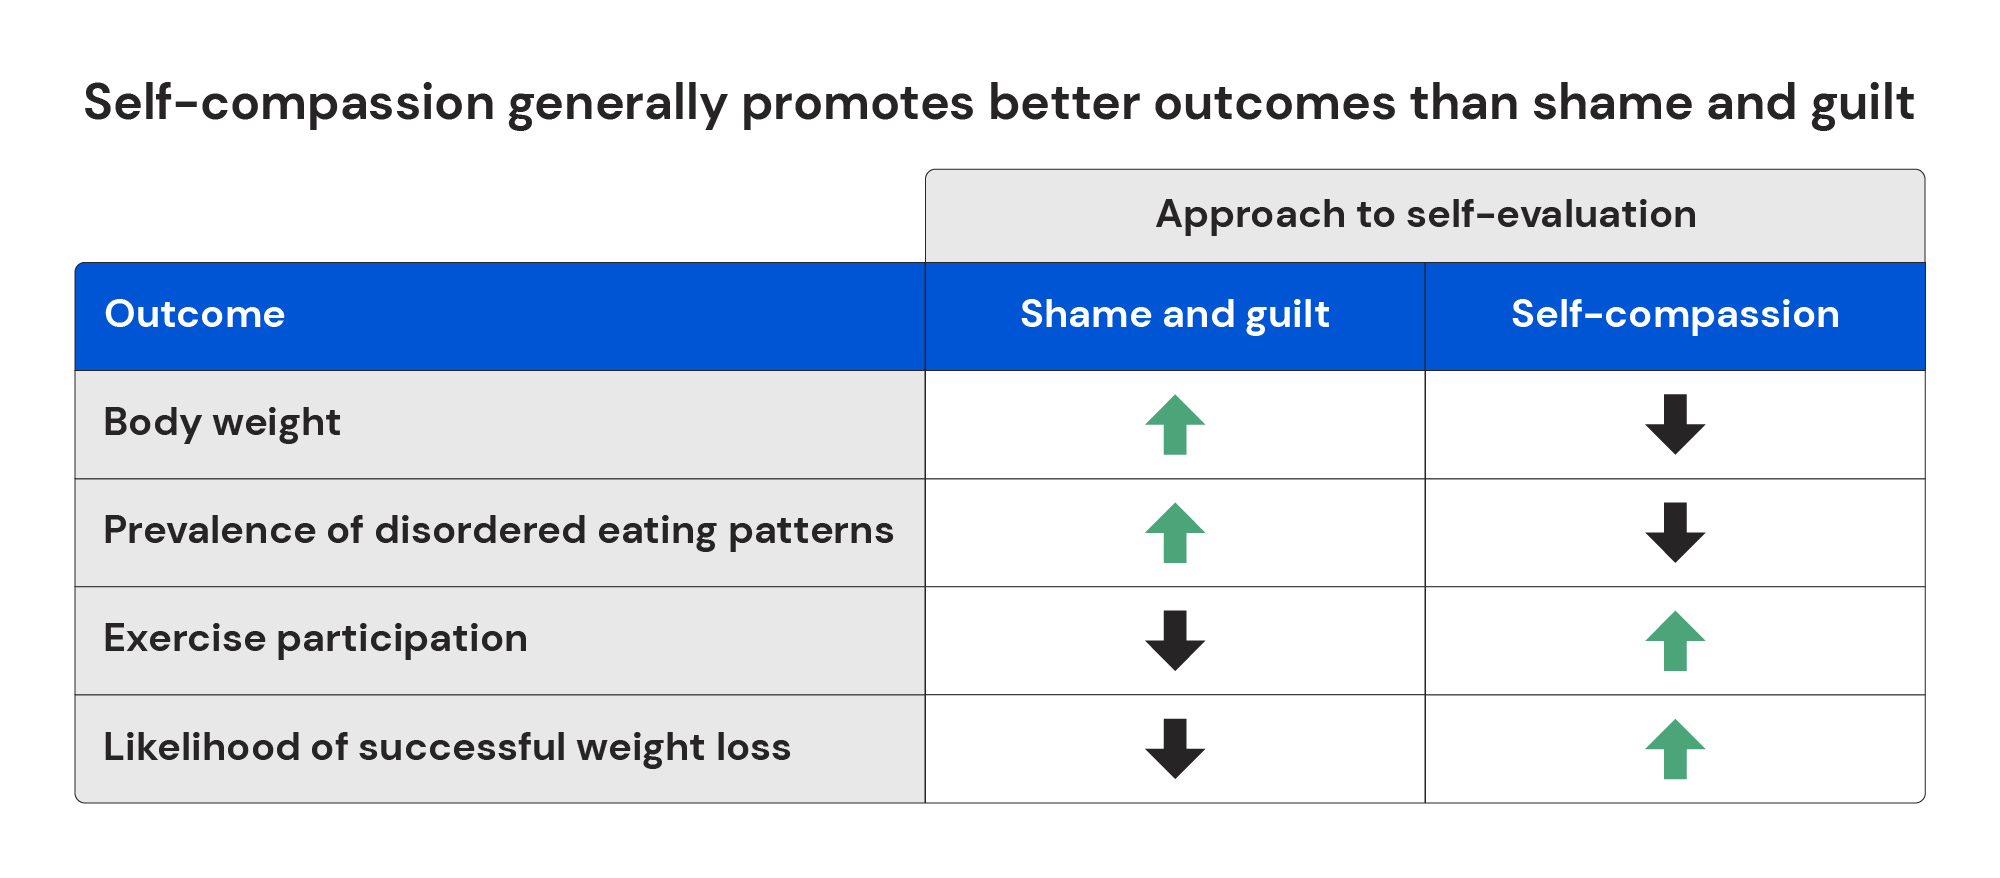 Self-compassion generally promotes better outcomes than same and guilt